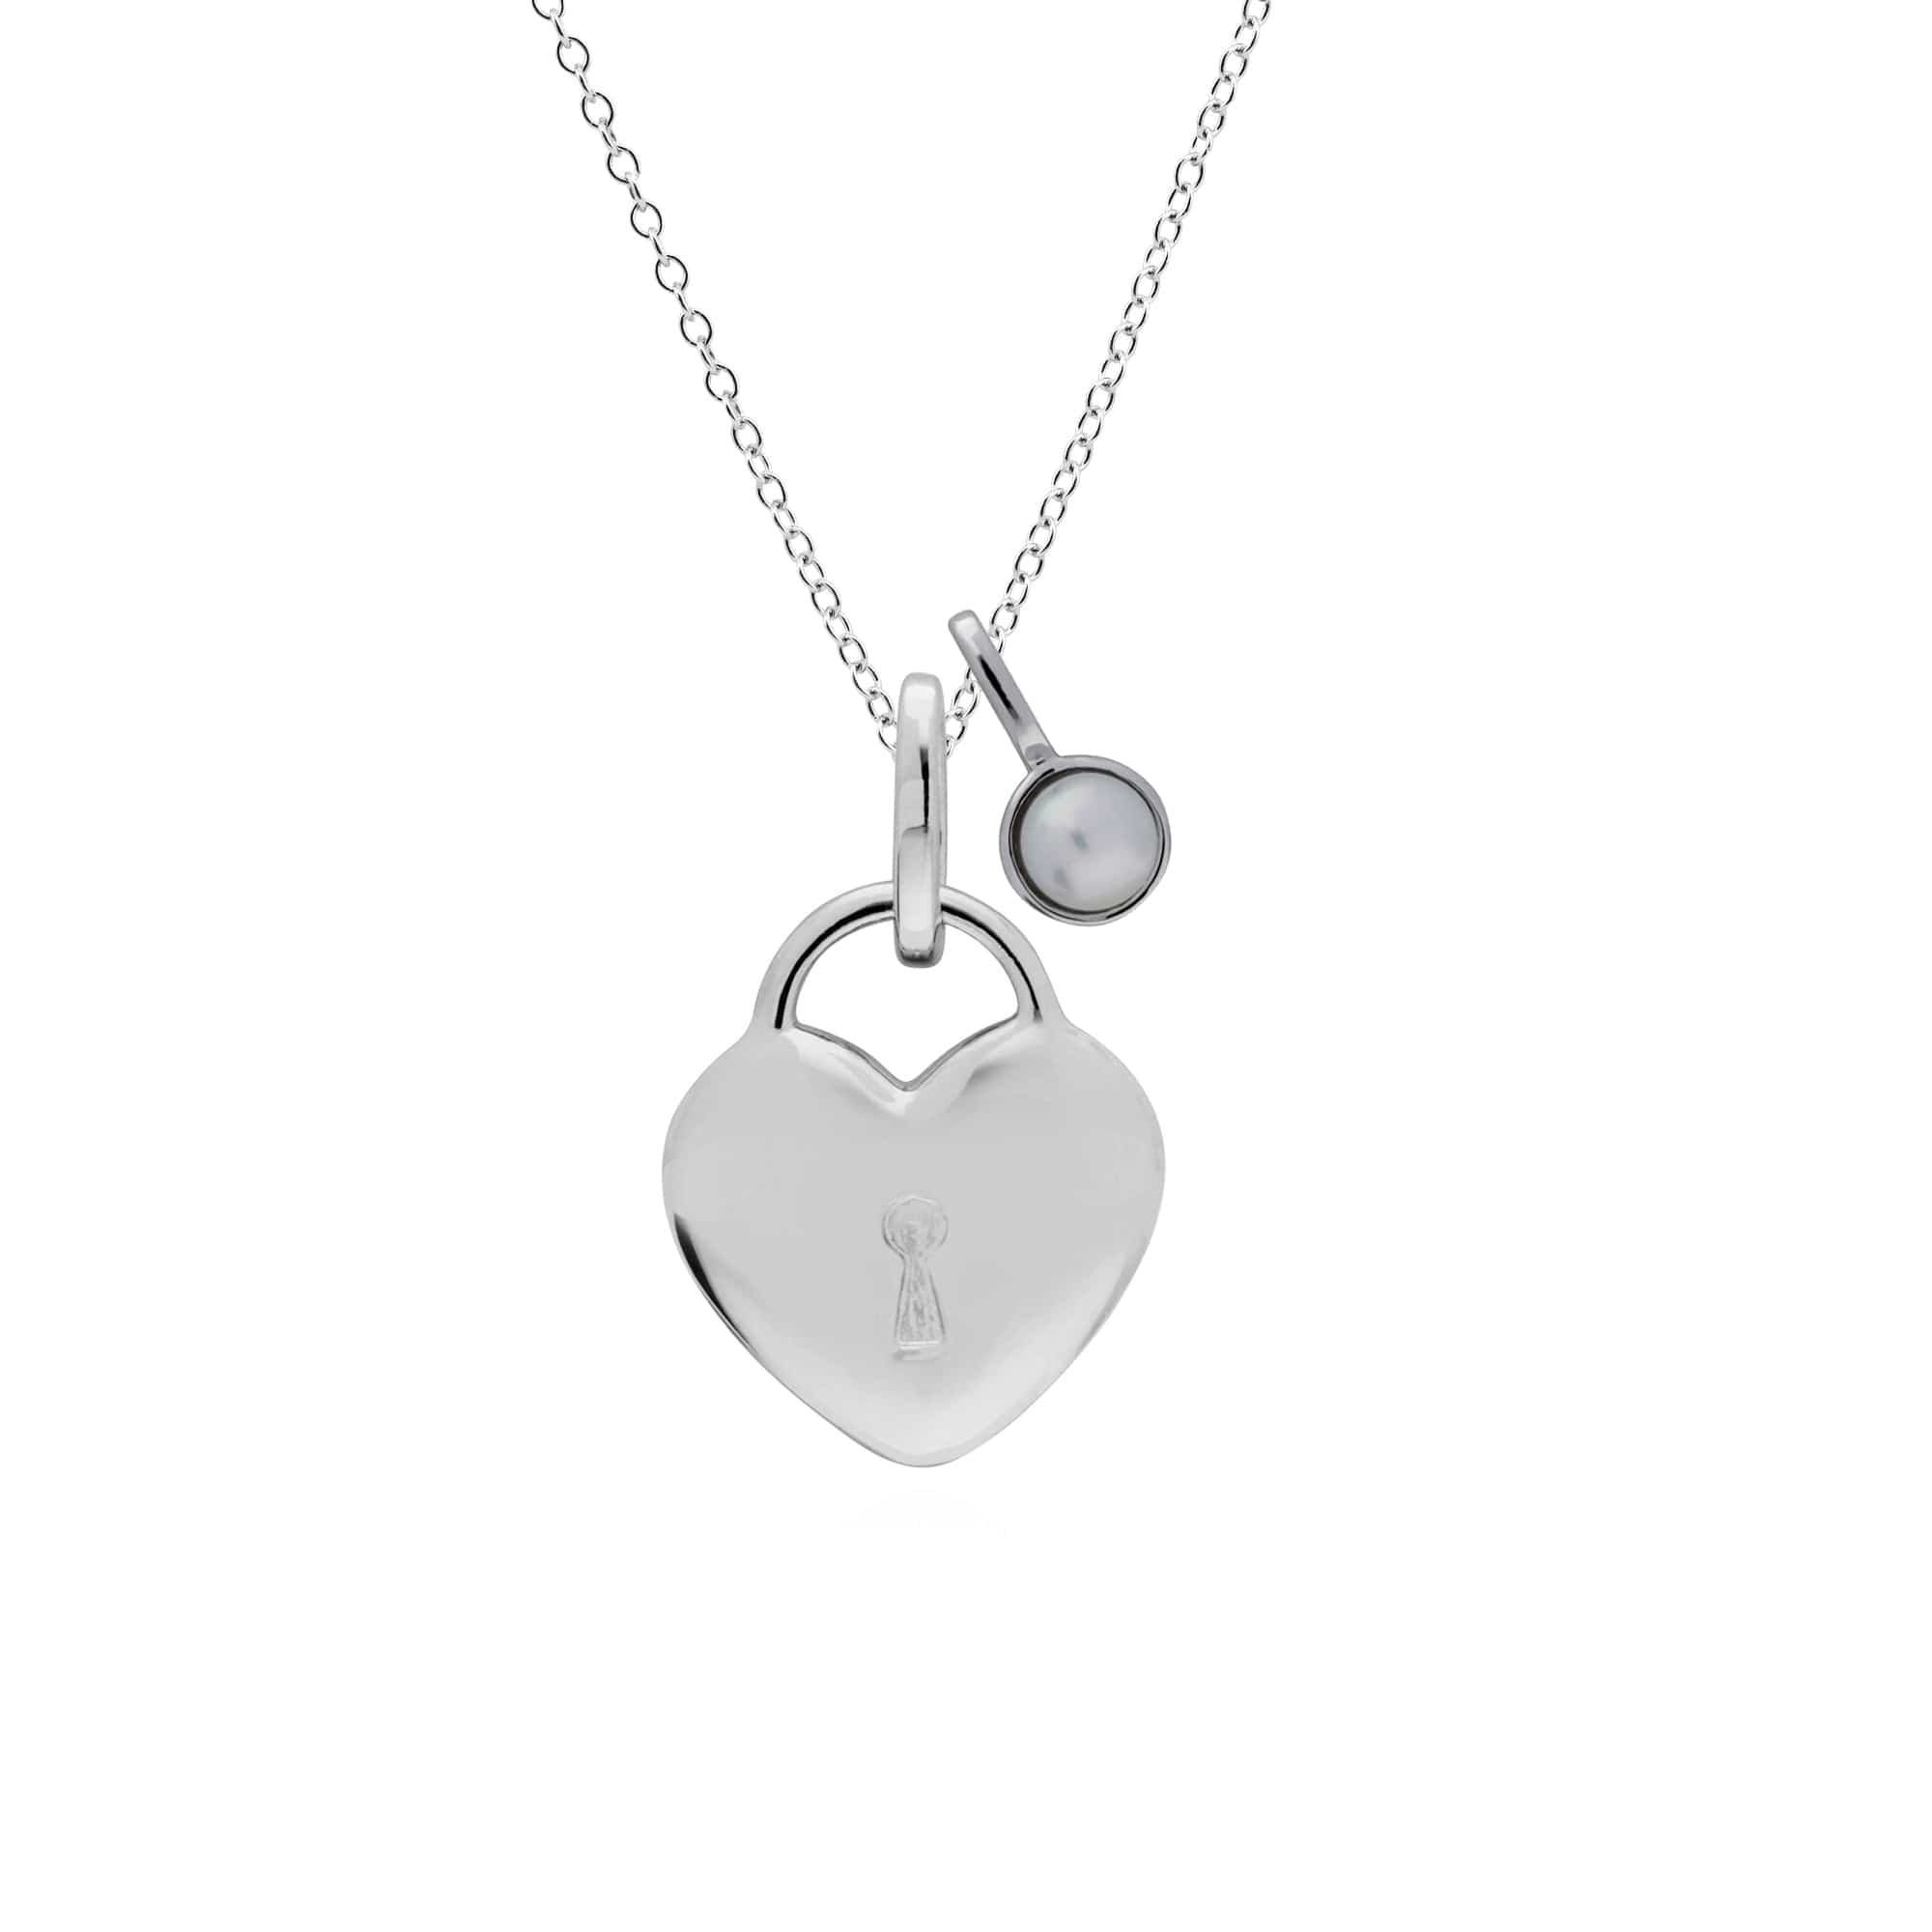 270P025801925-270P027001925 Classic Heart Lock Pendant & Pearl Charm in 925 Sterling Silver 1